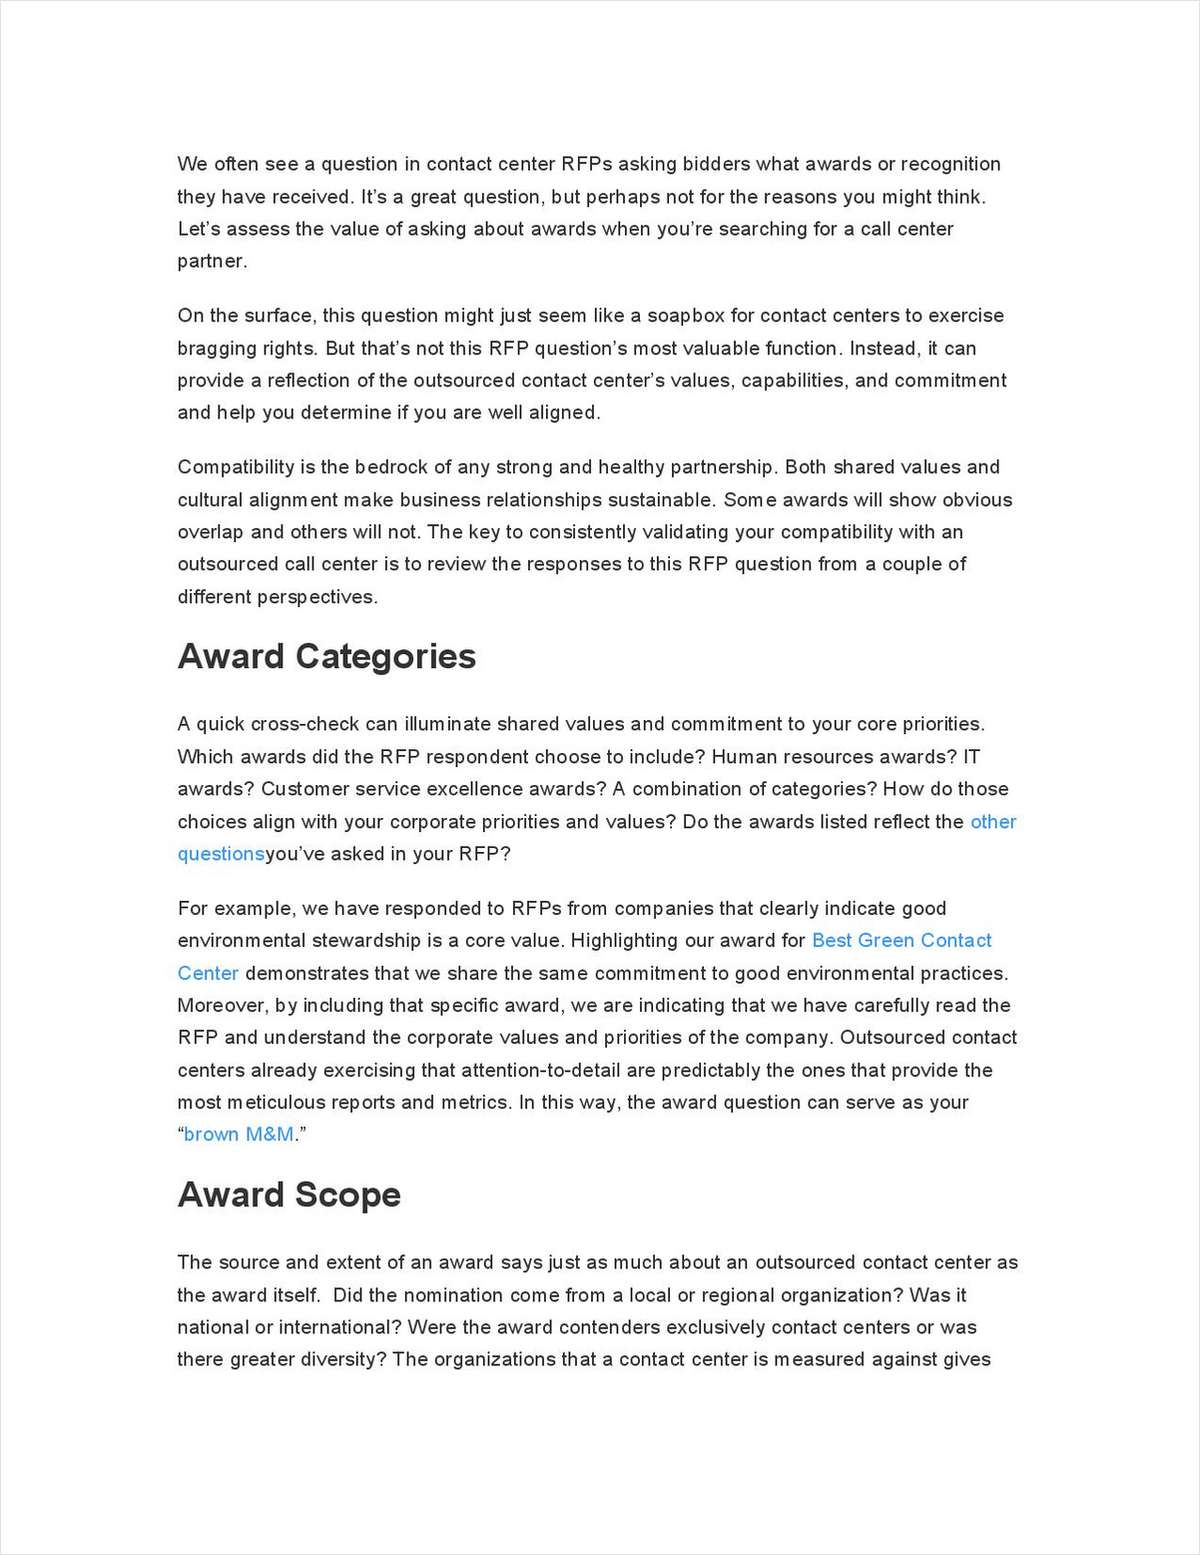 Upgrade Your Contact Center RFP By Asking About Awards